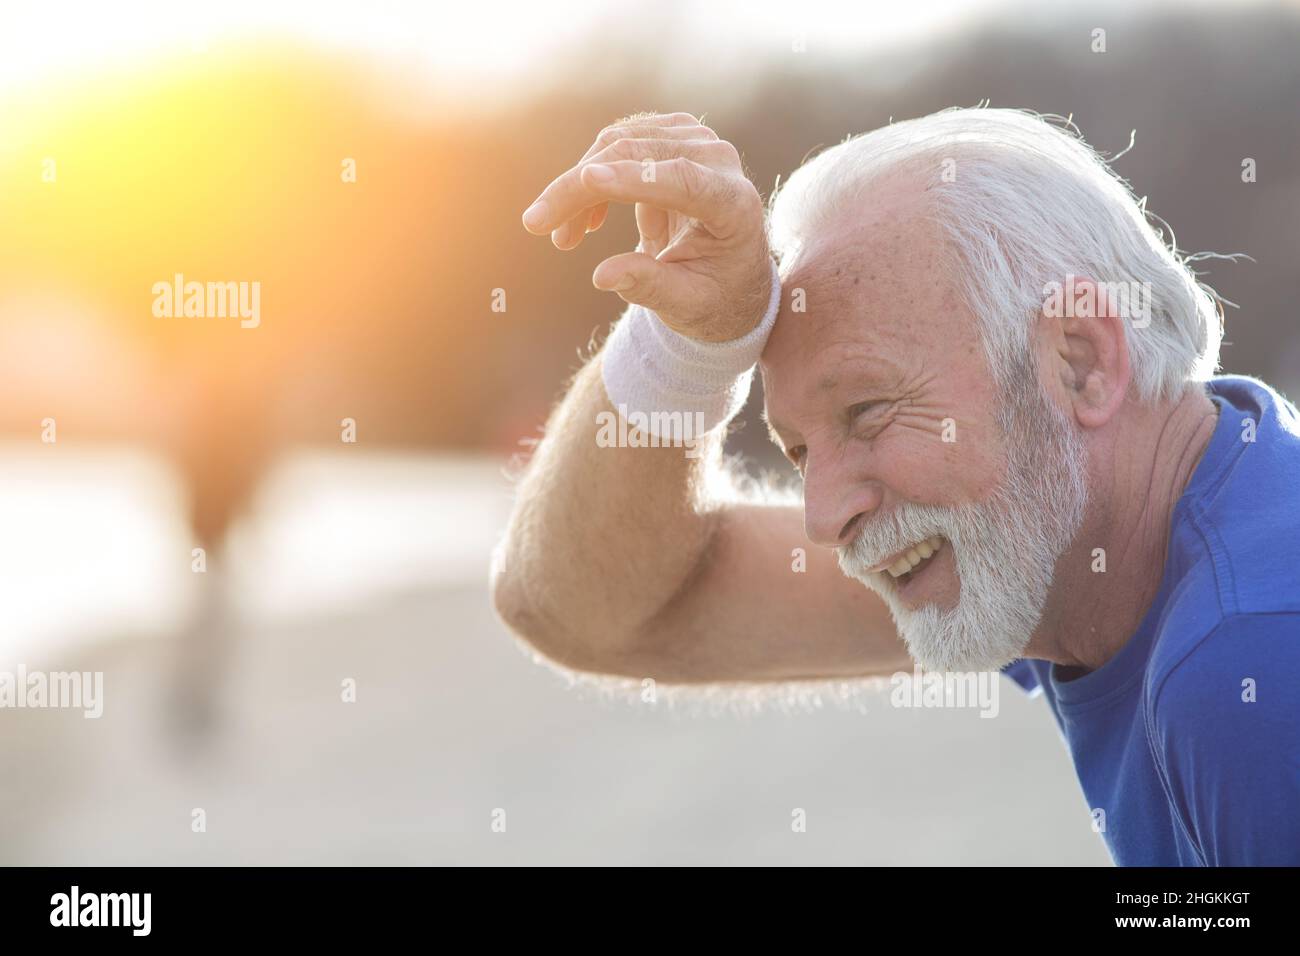 Tired senior bearded man wiping sweat from his forehead with wristband after outdoor exercise Stock Photo